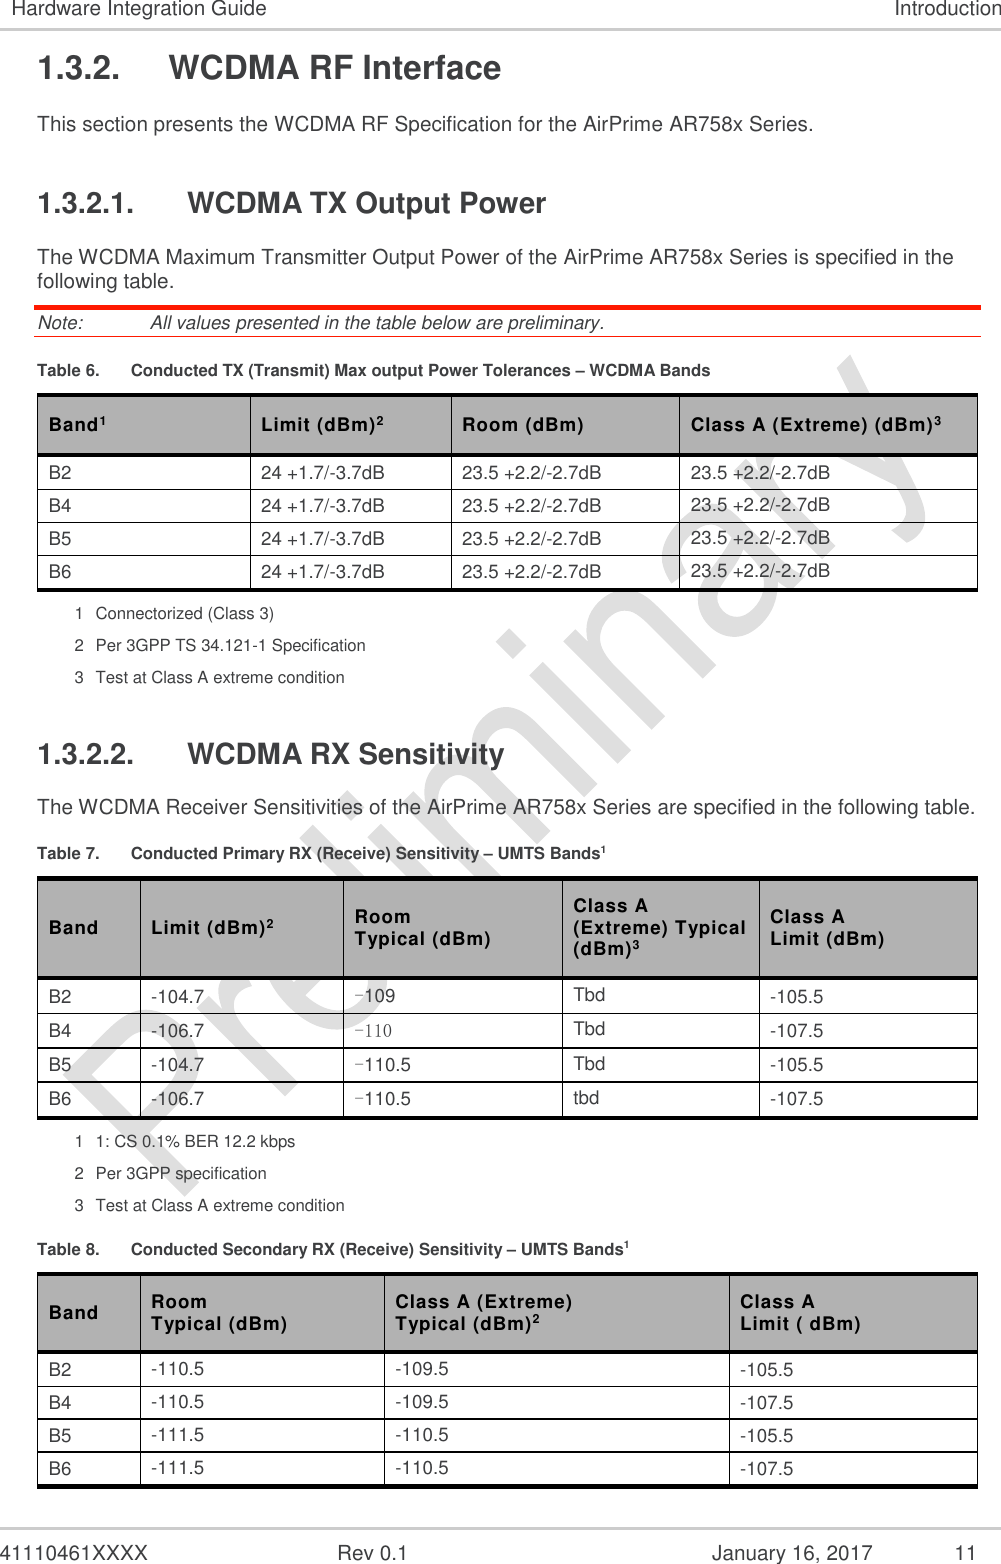  41110461XXXX  Rev 0.1  January 16, 2017  11 Hardware Integration Guide Introduction 1.3.2.  WCDMA RF Interface This section presents the WCDMA RF Specification for the AirPrime AR758x Series. 1.3.2.1.  WCDMA TX Output Power The WCDMA Maximum Transmitter Output Power of the AirPrime AR758x Series is specified in the following table. Note:   All values presented in the table below are preliminary. Table 6.  Conducted TX (Transmit) Max output Power Tolerances – WCDMA Bands Band1 Limit (dBm)2 Room (dBm) Class A (Extreme) (dBm)3 B2 24 +1.7/-3.7dB 23.5 +2.2/-2.7dB 23.5 +2.2/-2.7dB B4 24 +1.7/-3.7dB 23.5 +2.2/-2.7dB 23.5 +2.2/-2.7dB B5 24 +1.7/-3.7dB 23.5 +2.2/-2.7dB 23.5 +2.2/-2.7dB B6 24 +1.7/-3.7dB 23.5 +2.2/-2.7dB 23.5 +2.2/-2.7dB 1  Connectorized (Class 3) 2  Per 3GPP TS 34.121-1 Specification 3  Test at Class A extreme condition 1.3.2.2.  WCDMA RX Sensitivity The WCDMA Receiver Sensitivities of the AirPrime AR758x Series are specified in the following table. Table 7.  Conducted Primary RX (Receive) Sensitivity – UMTS Bands1 Band Limit (dBm)2 Room Typical (dBm) Class A (Extreme) Typical (dBm)3 Class A Limit (dBm) B2 -104.7 -109 Tbd -105.5 B4 -106.7 -110 Tbd -107.5 B5 -104.7 -110.5 Tbd -105.5 B6 -106.7 -110.5 tbd -107.5 1  1: CS 0.1% BER 12.2 kbps 2  Per 3GPP specification 3  Test at Class A extreme condition Table 8.  Conducted Secondary RX (Receive) Sensitivity – UMTS Bands1 Band Room Typical (dBm) Class A (Extreme) Typical (dBm)2 Class A Limit ( dBm) B2 -110.5 -109.5 -105.5 B4 -110.5 -109.5 -107.5 B5 -111.5 -110.5 -105.5 B6 -111.5 -110.5 -107.5 